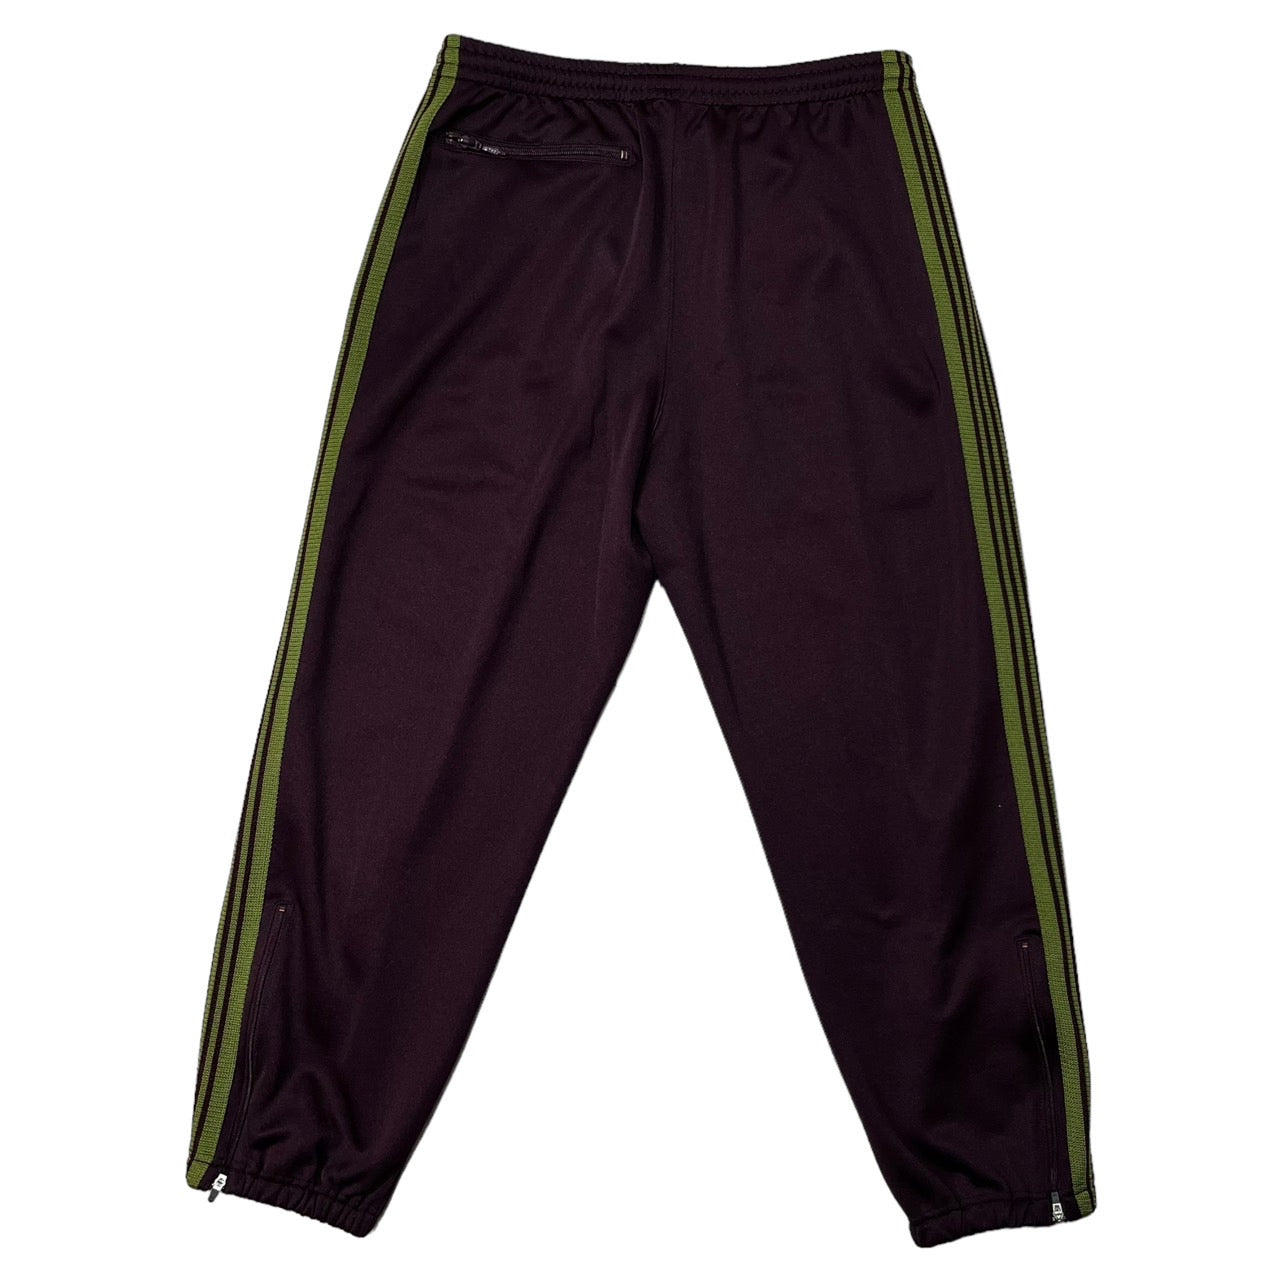 needles track pant ziped 21AW maroon